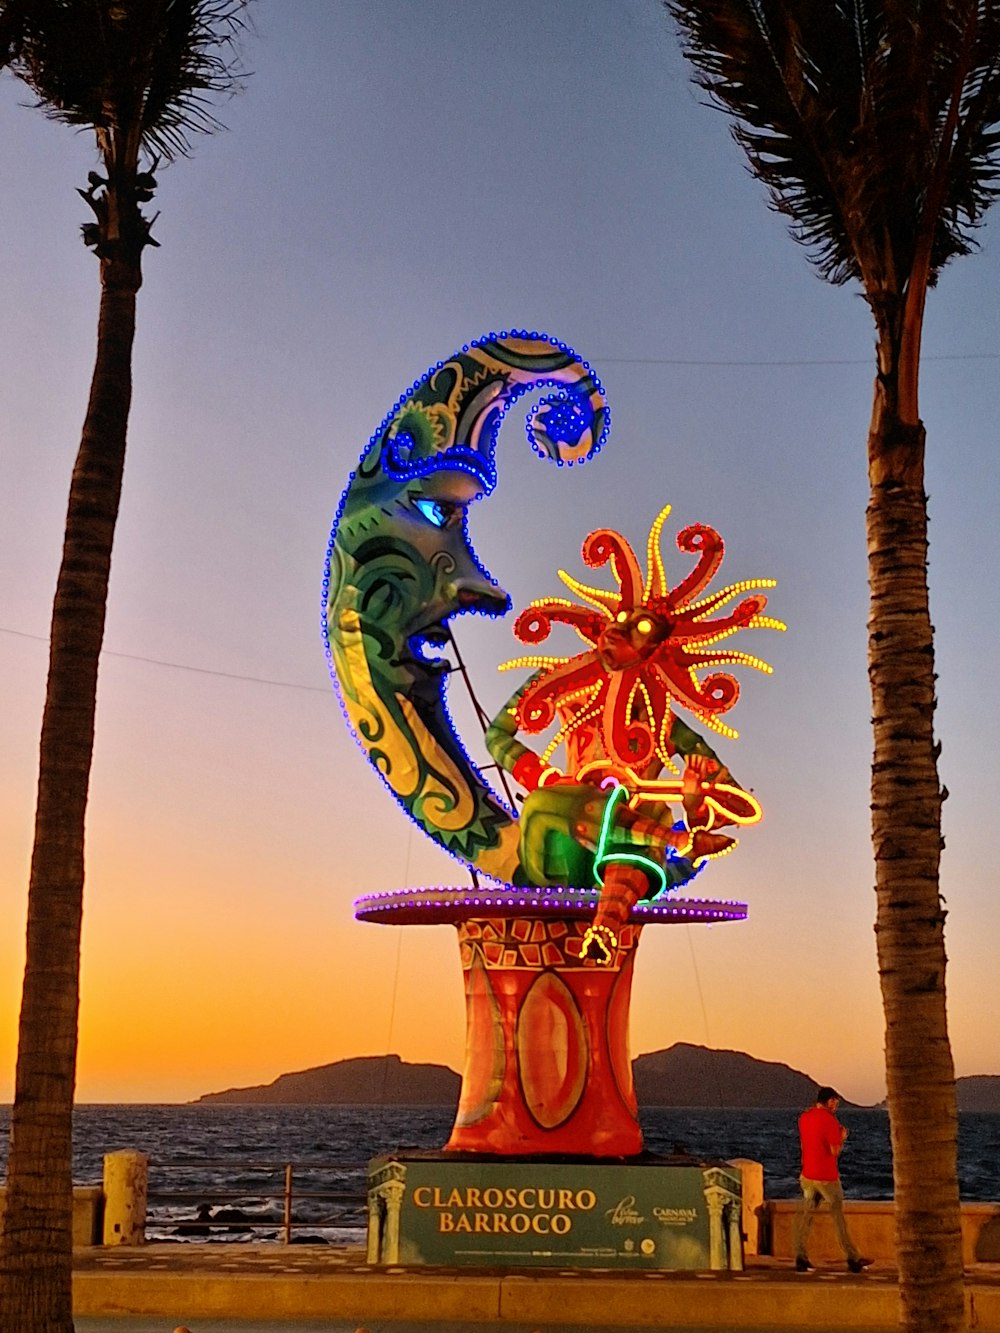 a colorful sculpture on the beach with palm trees